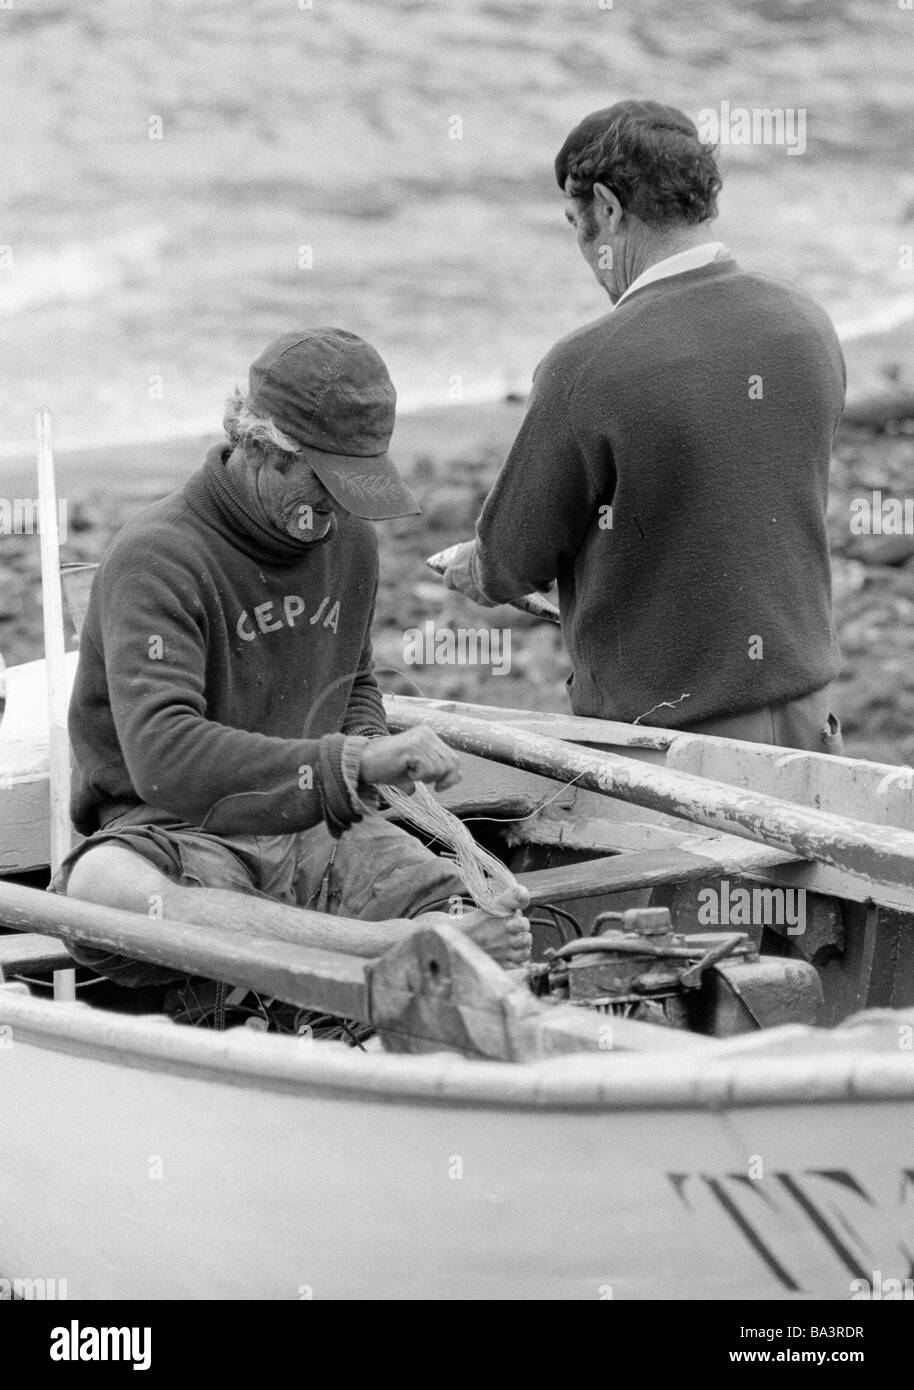 Eighties, black and white photo, economy, fishing port, fisherman sitting in a boat repairs a fishing net, aged 60 to 70 years, Spain, Canary Islands, Canaries, Tenerife, Puerto de la Cruz Stock Photo